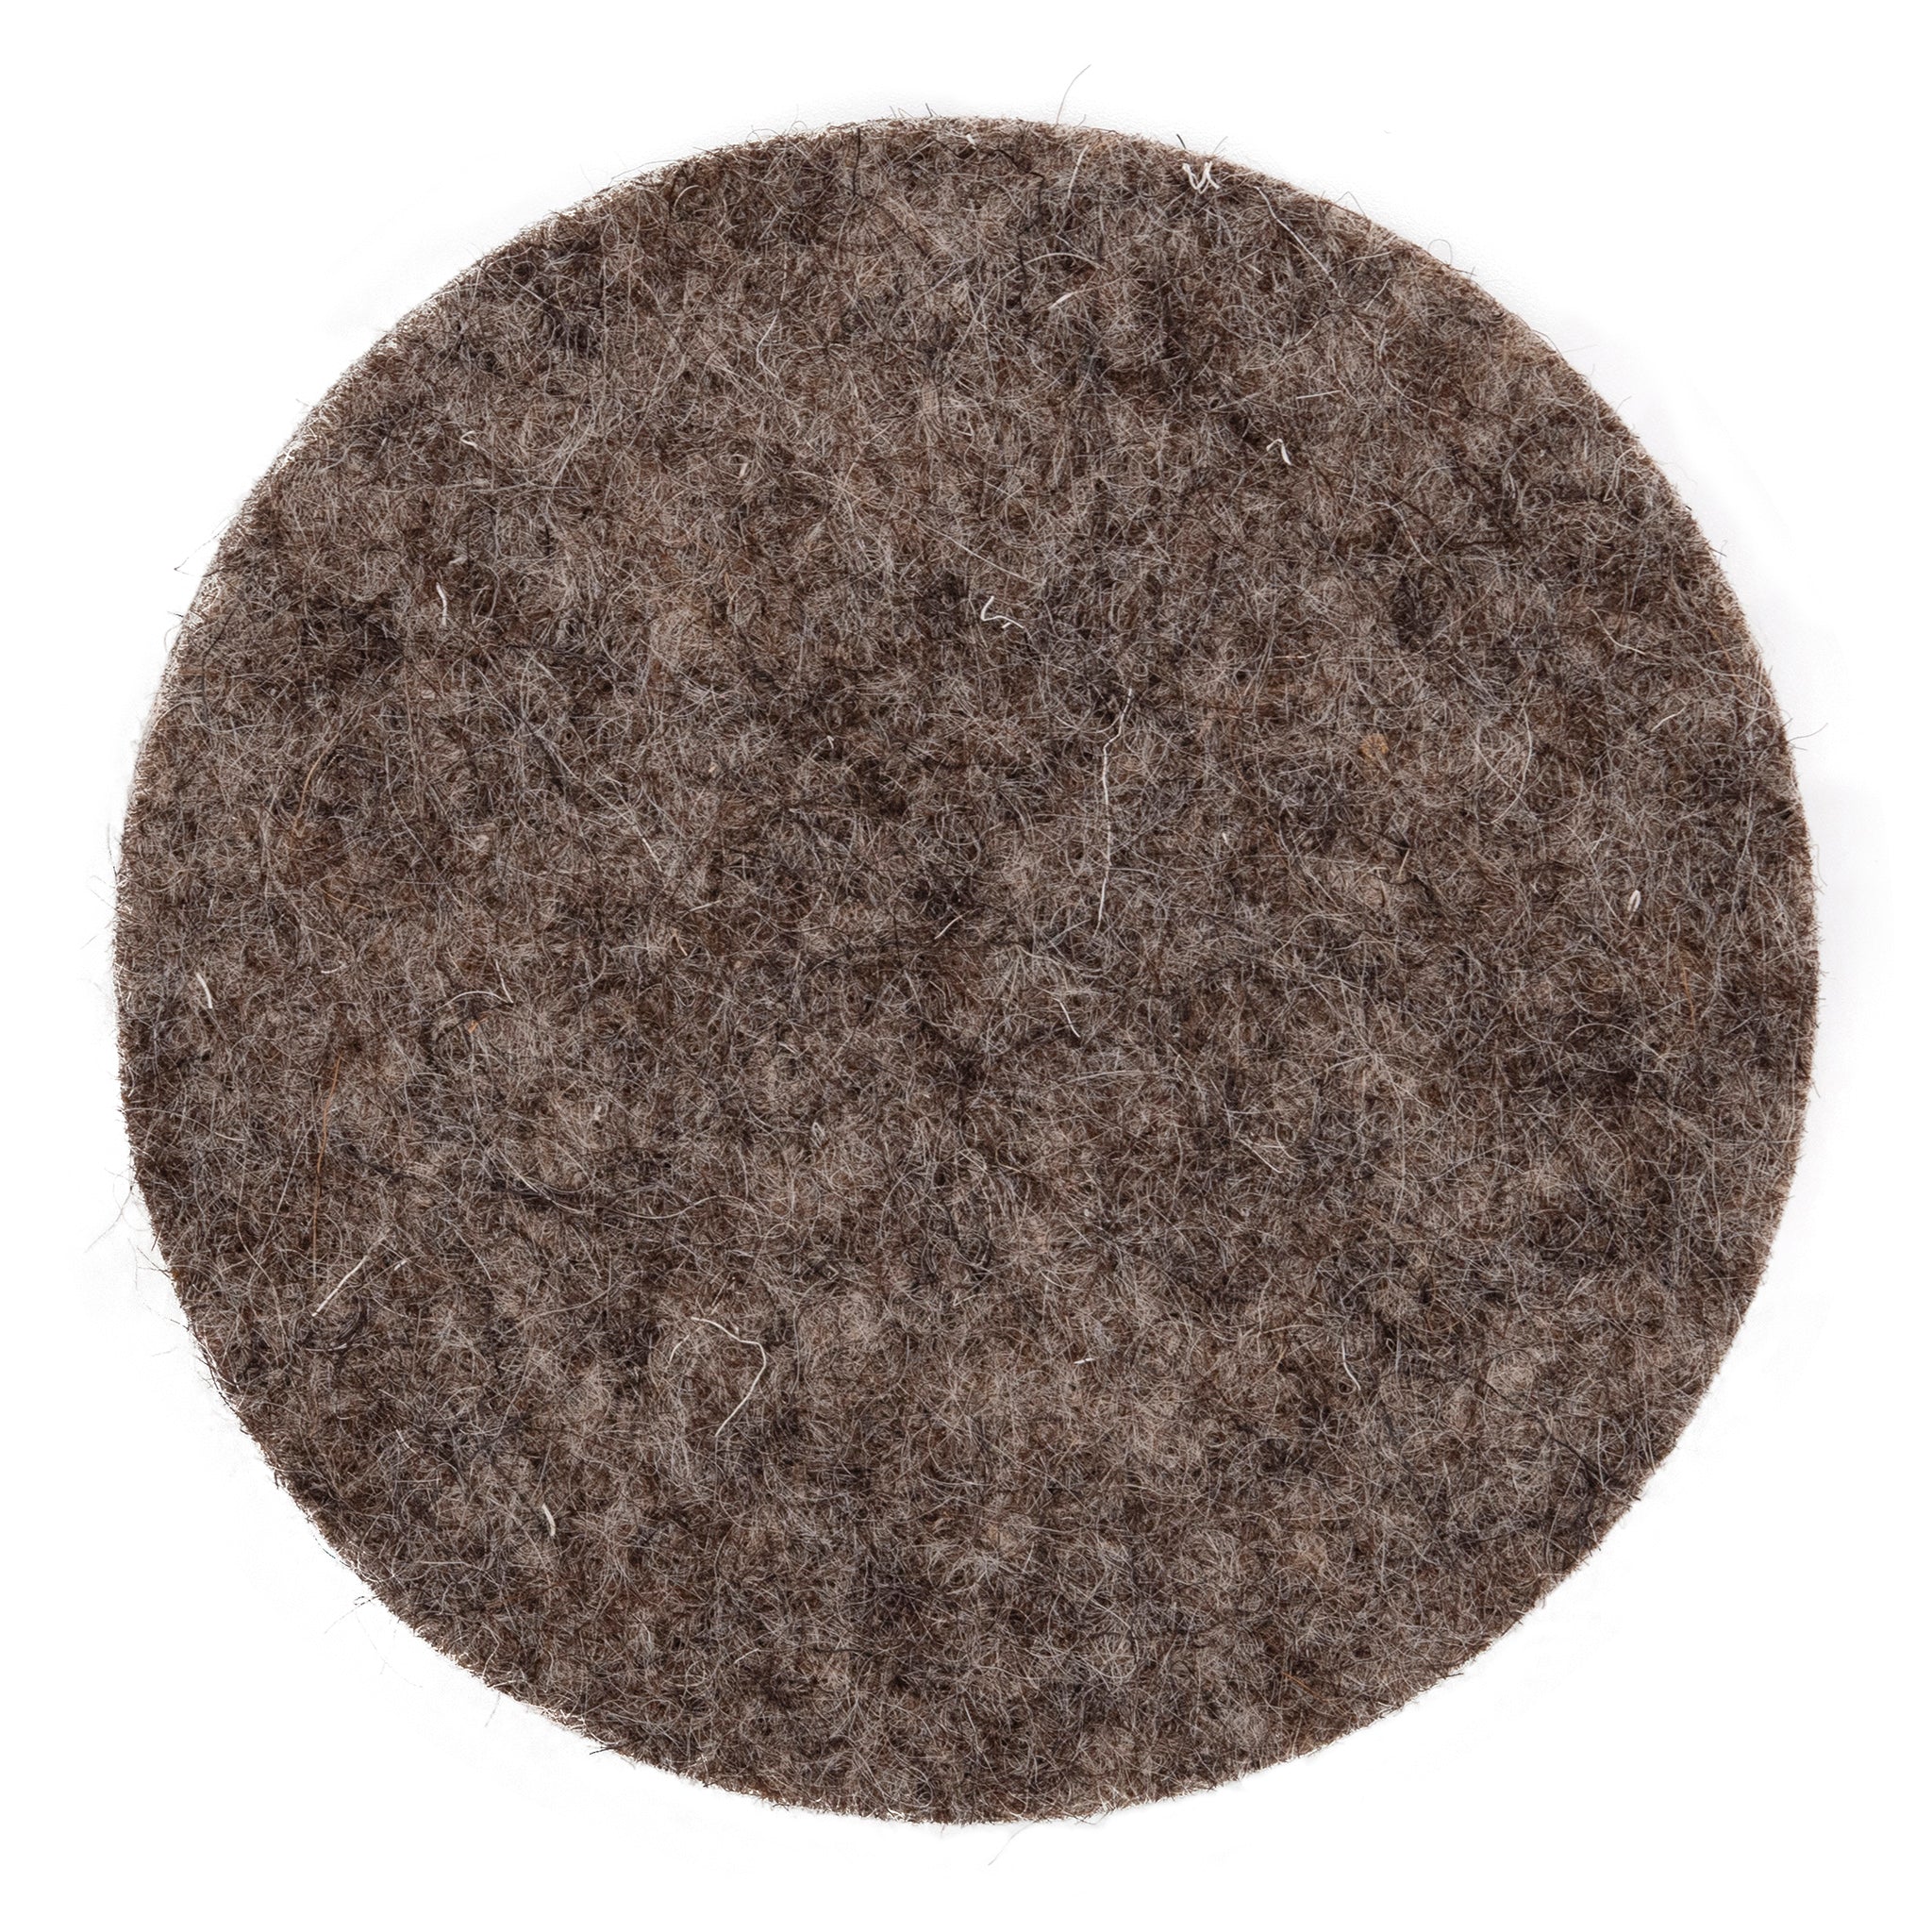 circular british sheep's wool luxury felted coaster on a white background